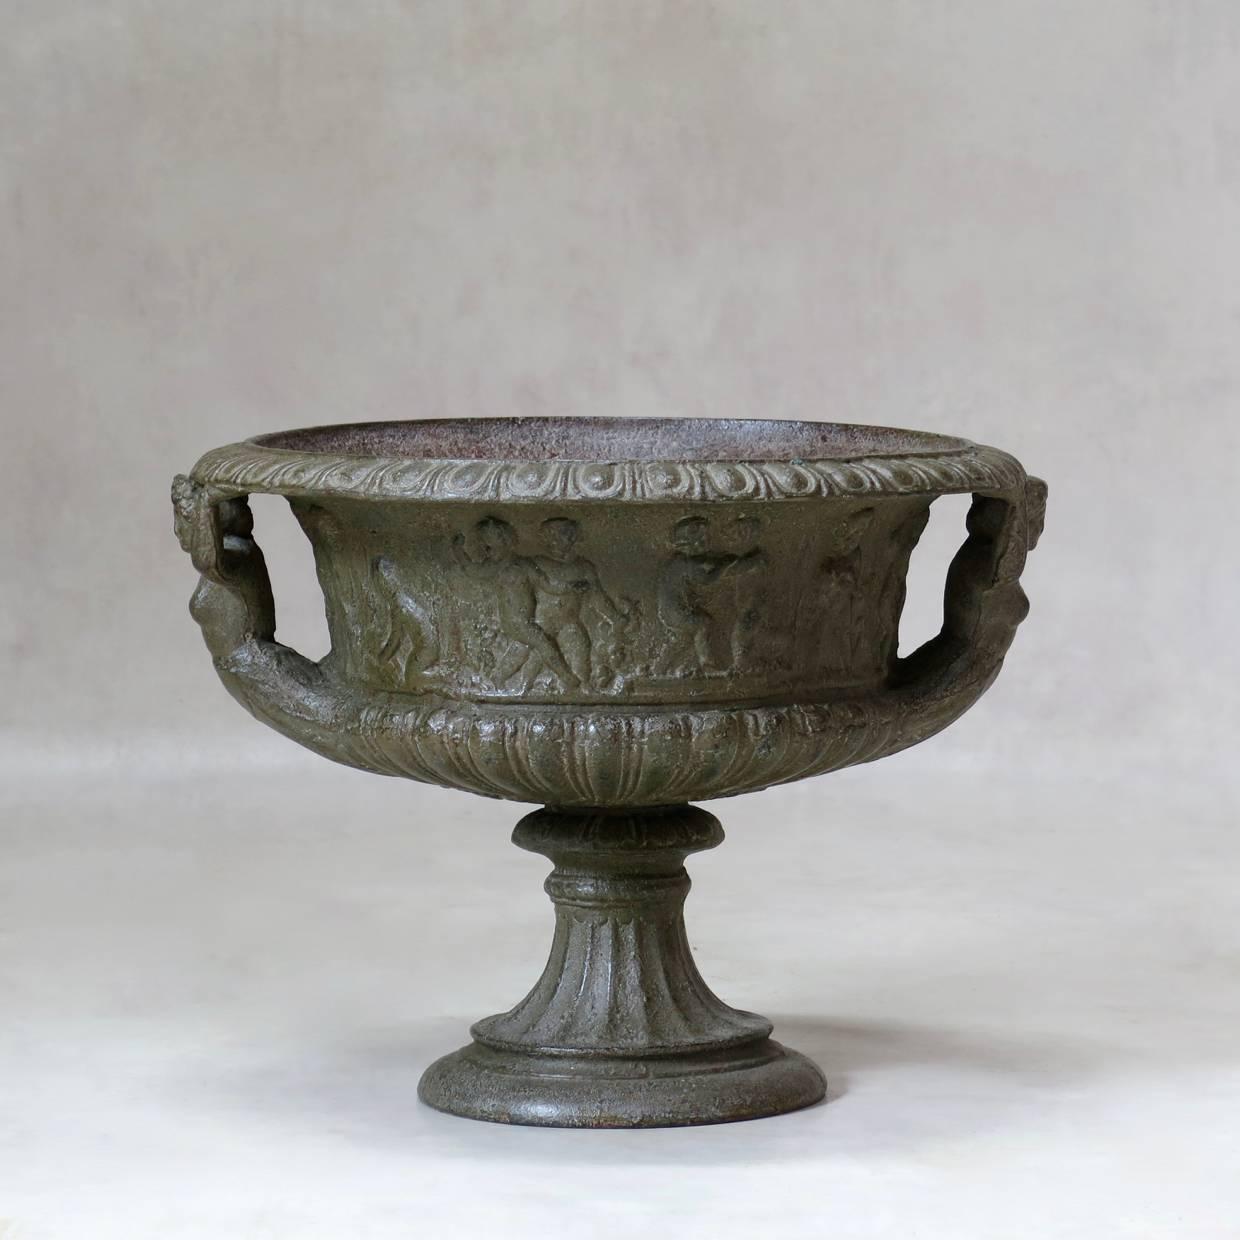 Classical pair of 19th century cast iron urns or planters with a dark silver/grey patina.